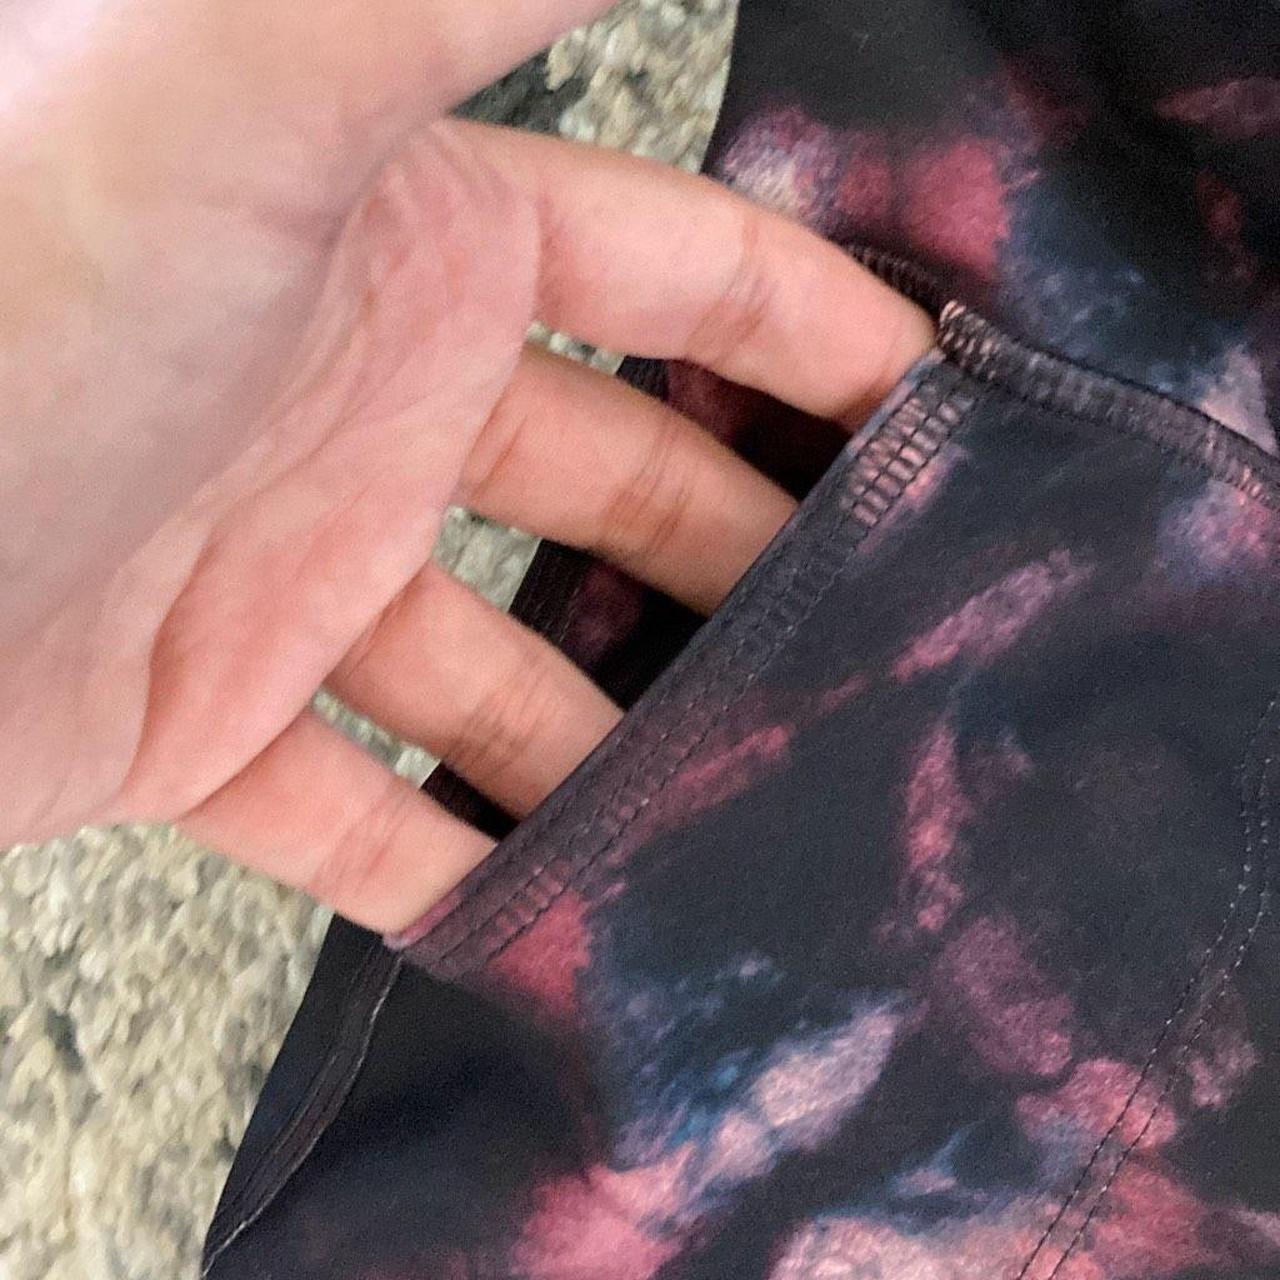 Details: Old Navy Active Powersoft Joggers in Pink